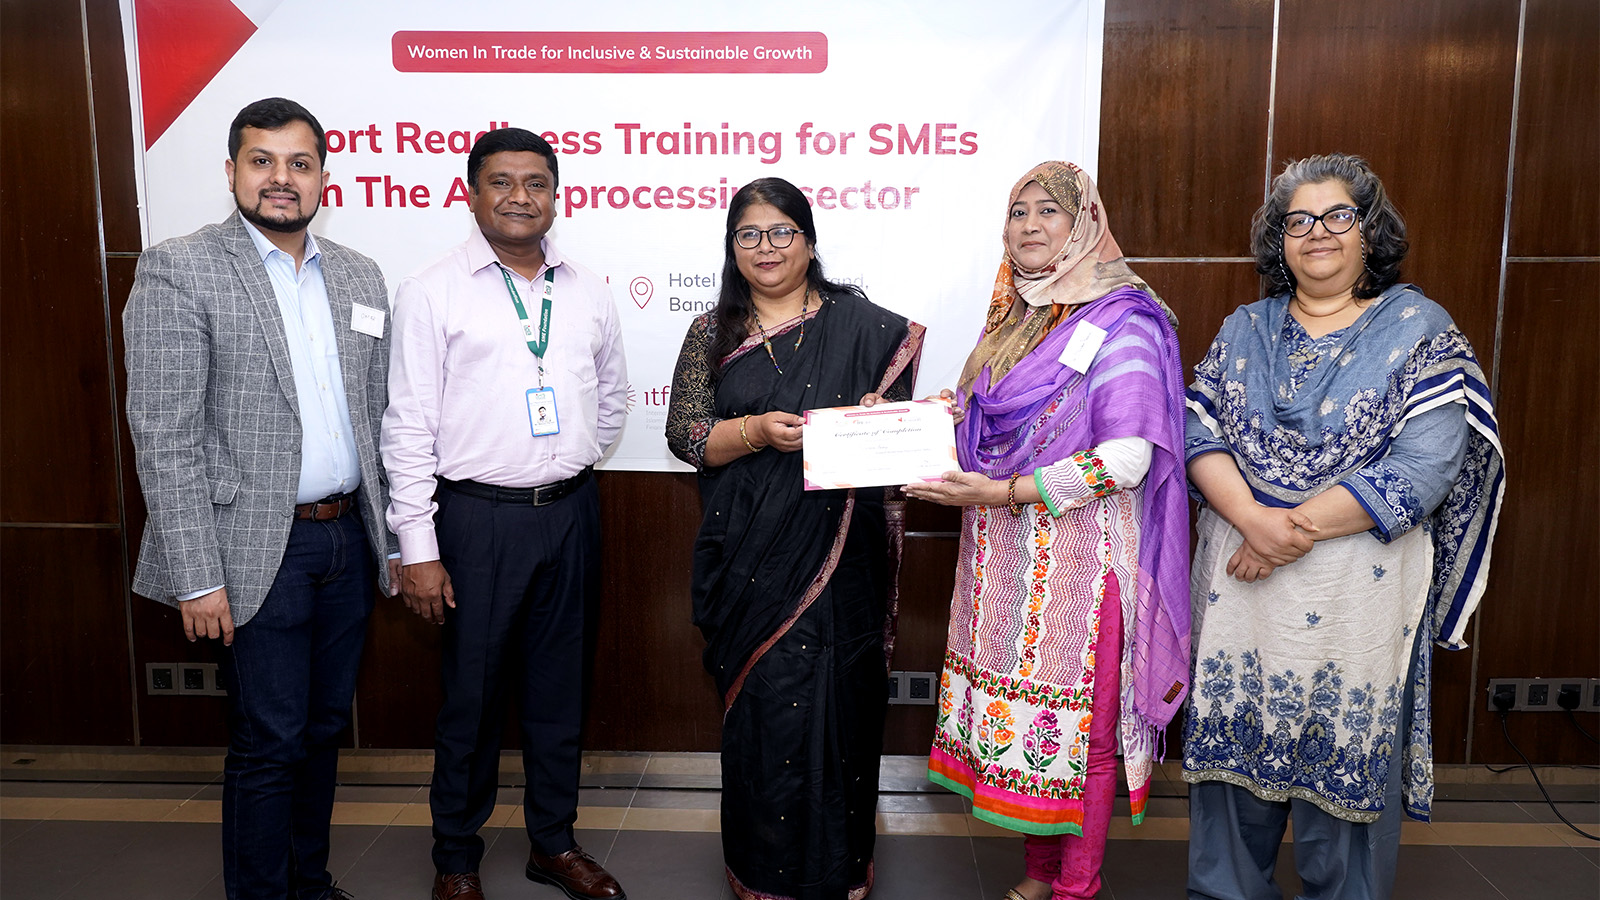 A participant at the event receiving certificate from the trainers